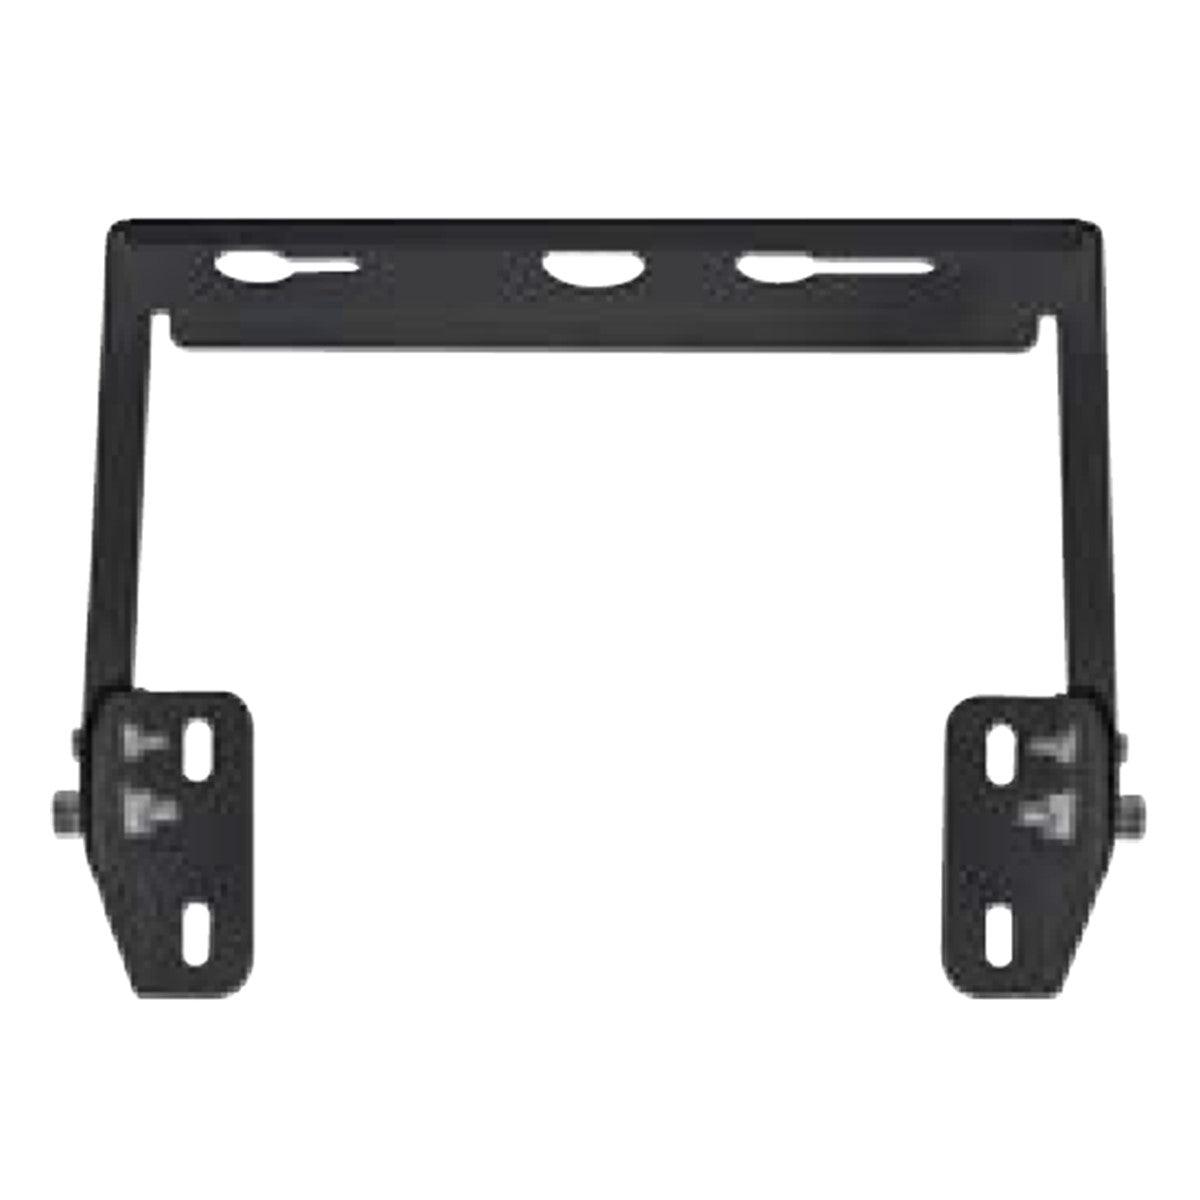 Sylvania UFO High Bay 3A Black Surface/Pendant Mount Bracket, For 200-240W Products - Bees Lighting